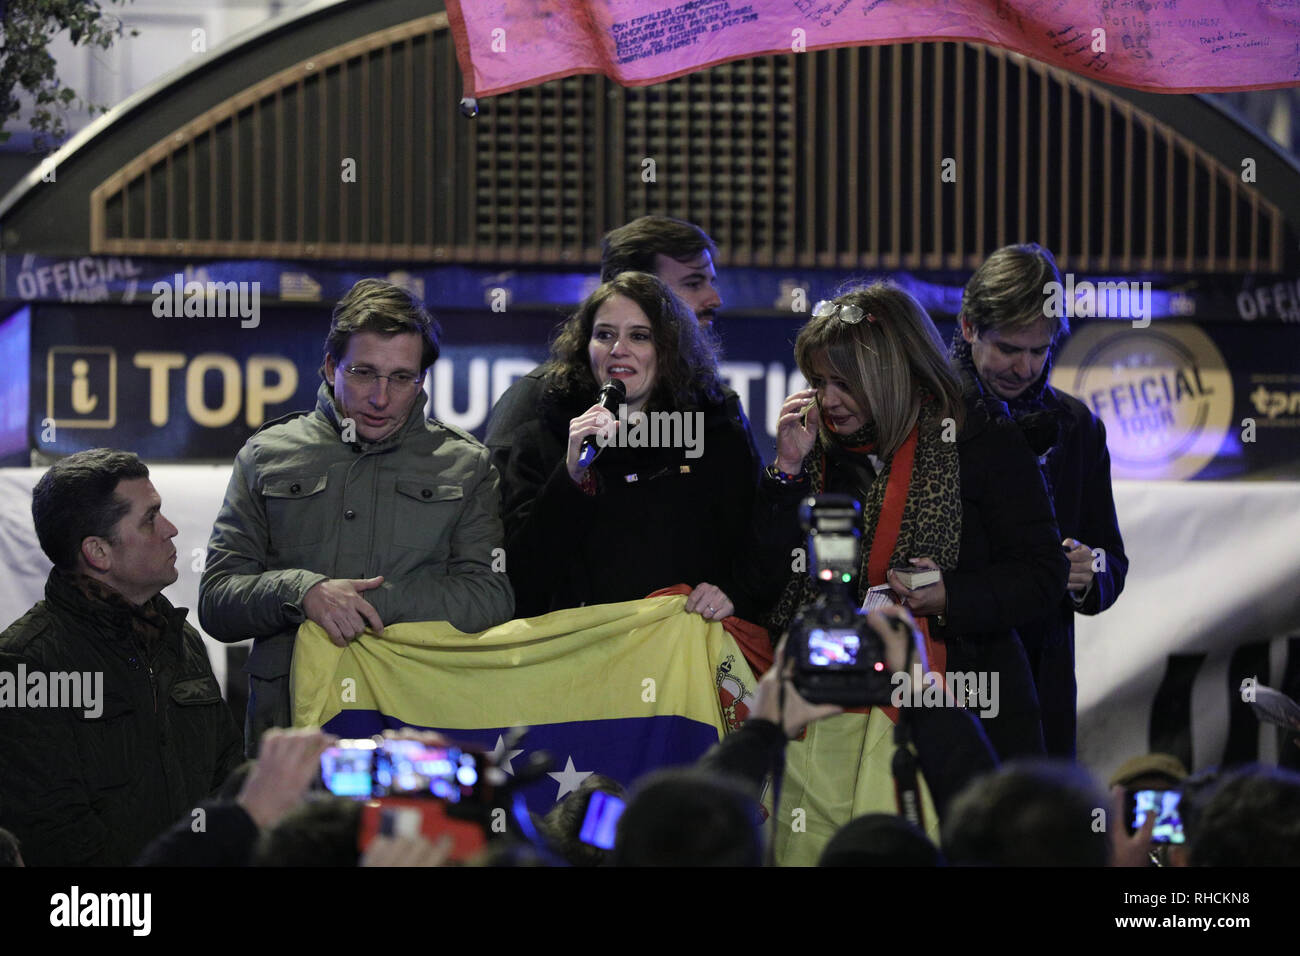 Madrid, Spain. 2nd Feb 2019. Jose Luis Martines Almeida(L), candidate for the Mayor of Madrid for the Popular Party (PP) and  Isabel Diaz Ayuso(C), candidate for the Presidency of the Community of Madrid for the Popular Party (PP) attending in the Puerta del Sol in Madrid this afternoon hosted another demonstration in support of Juan Guaidó to express the recognition as interim president of Venezuela Credit: Jesús Hellin/Alamy Live News Stock Photo